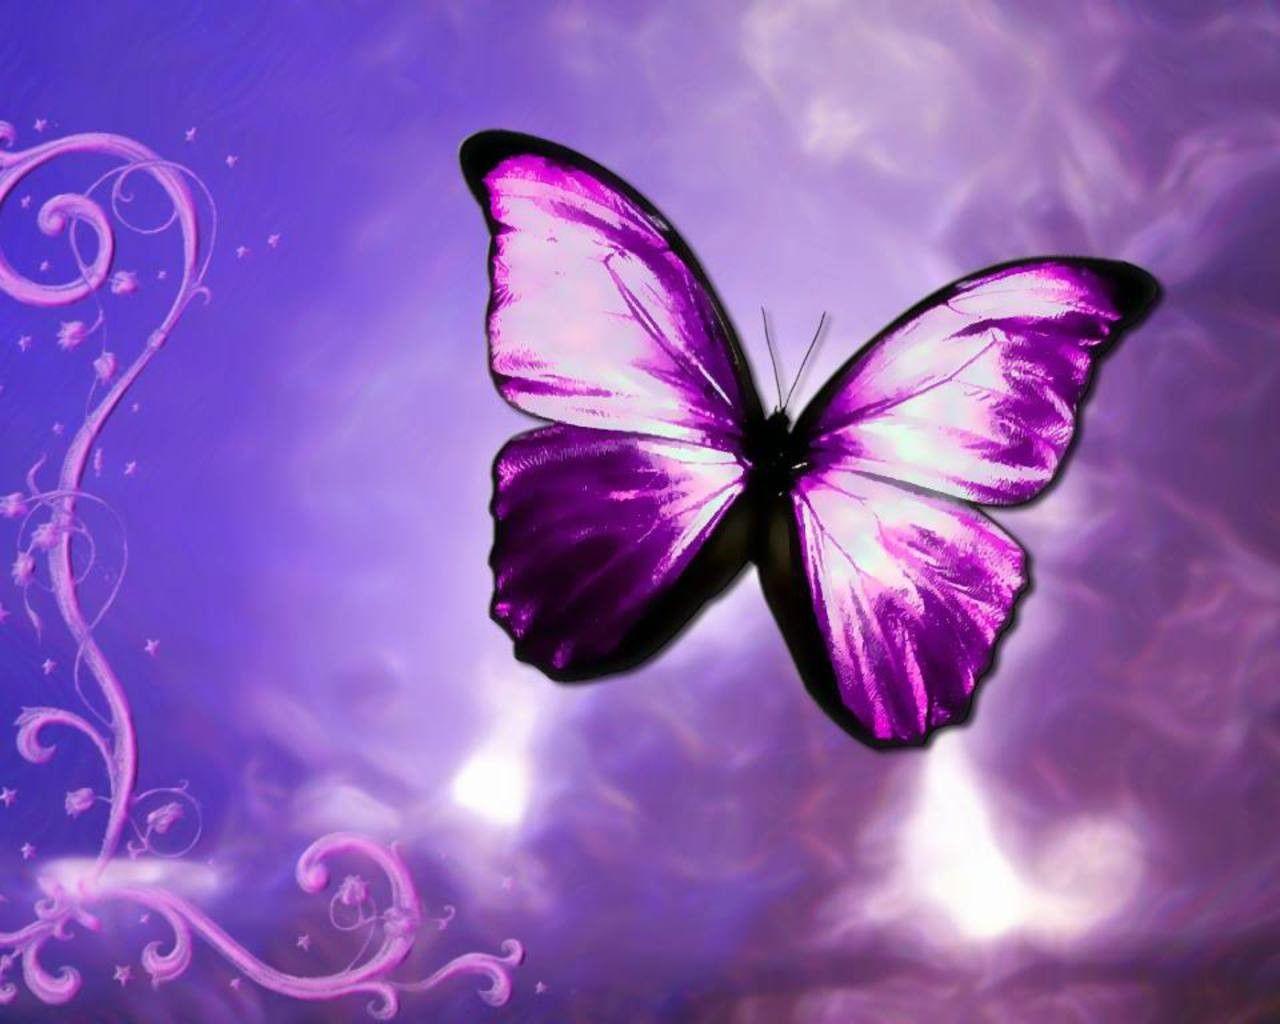 animated butterfly live wallpaper windows 10